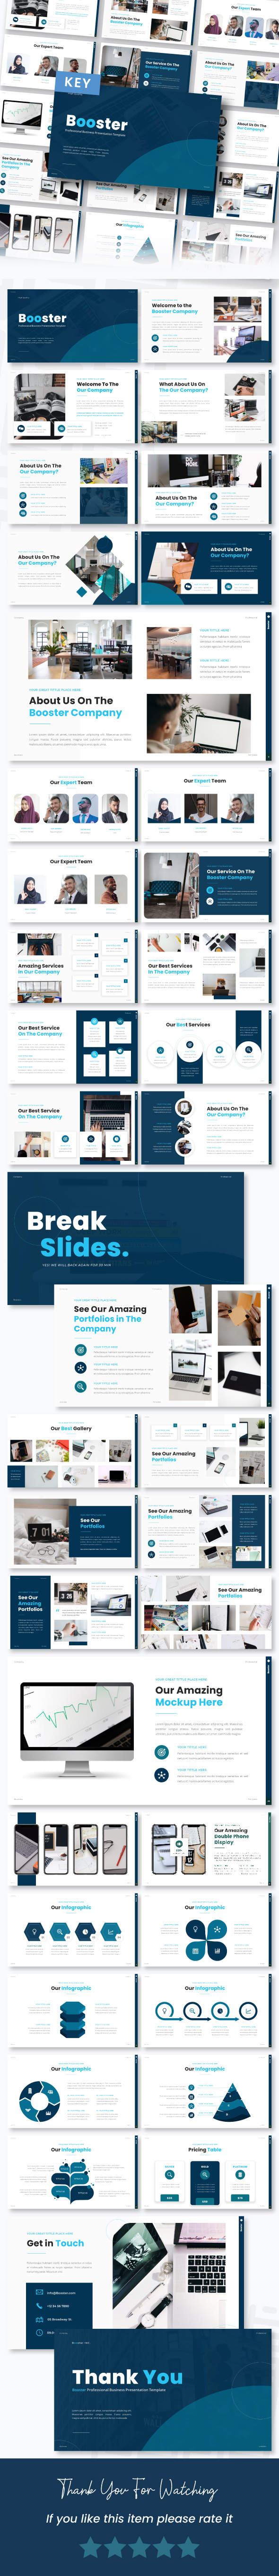 [DOWNLOAD]Booster - Business Keynote Template